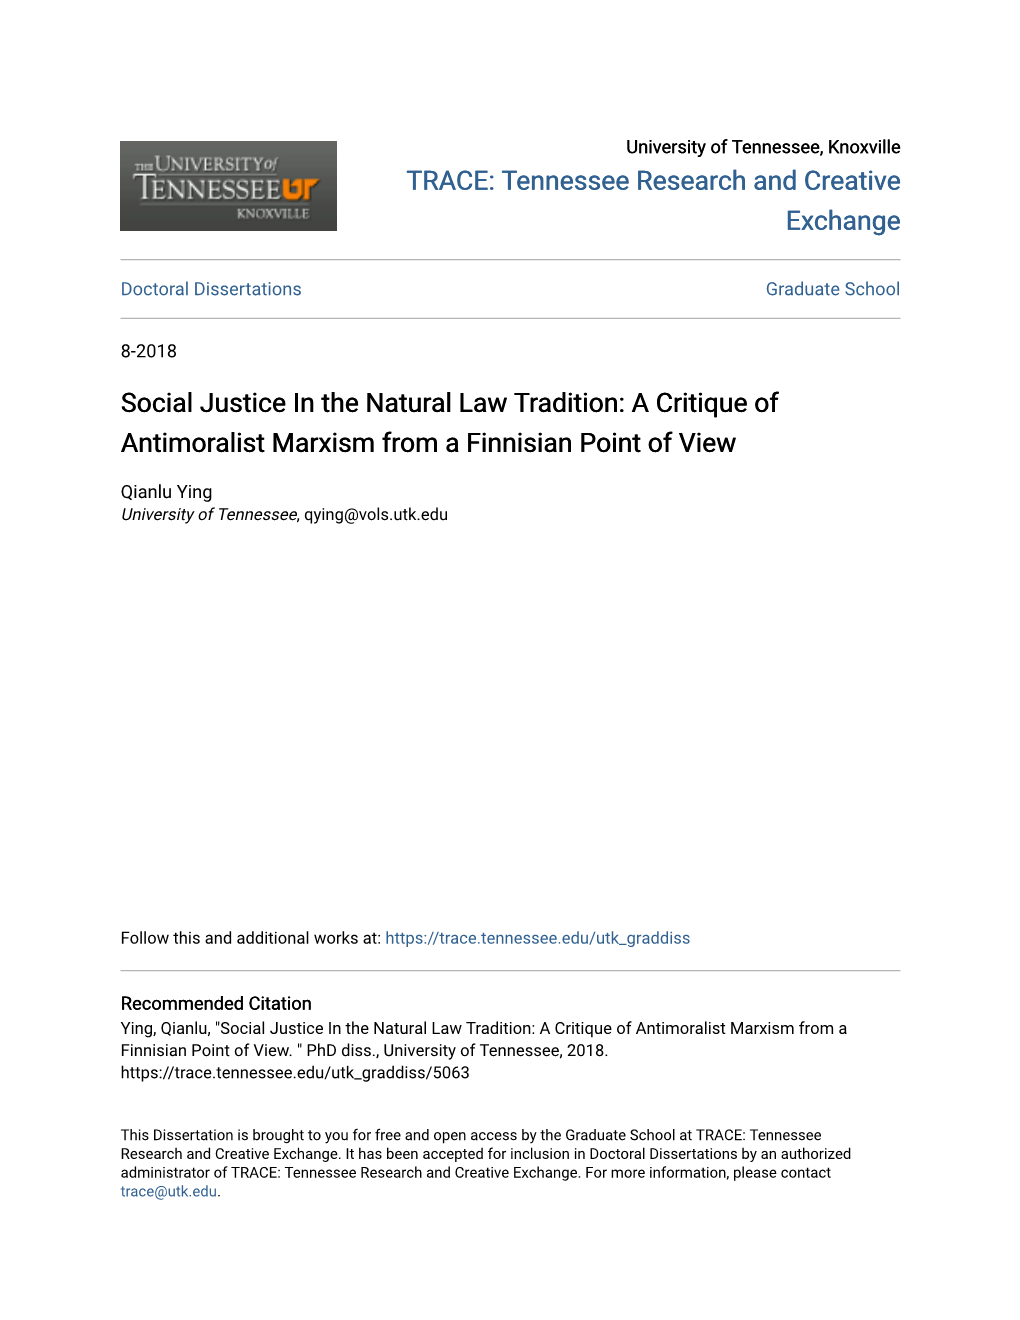 Social Justice in the Natural Law Tradition: a Critique of Antimoralist Marxism from a Finnisian Point of View